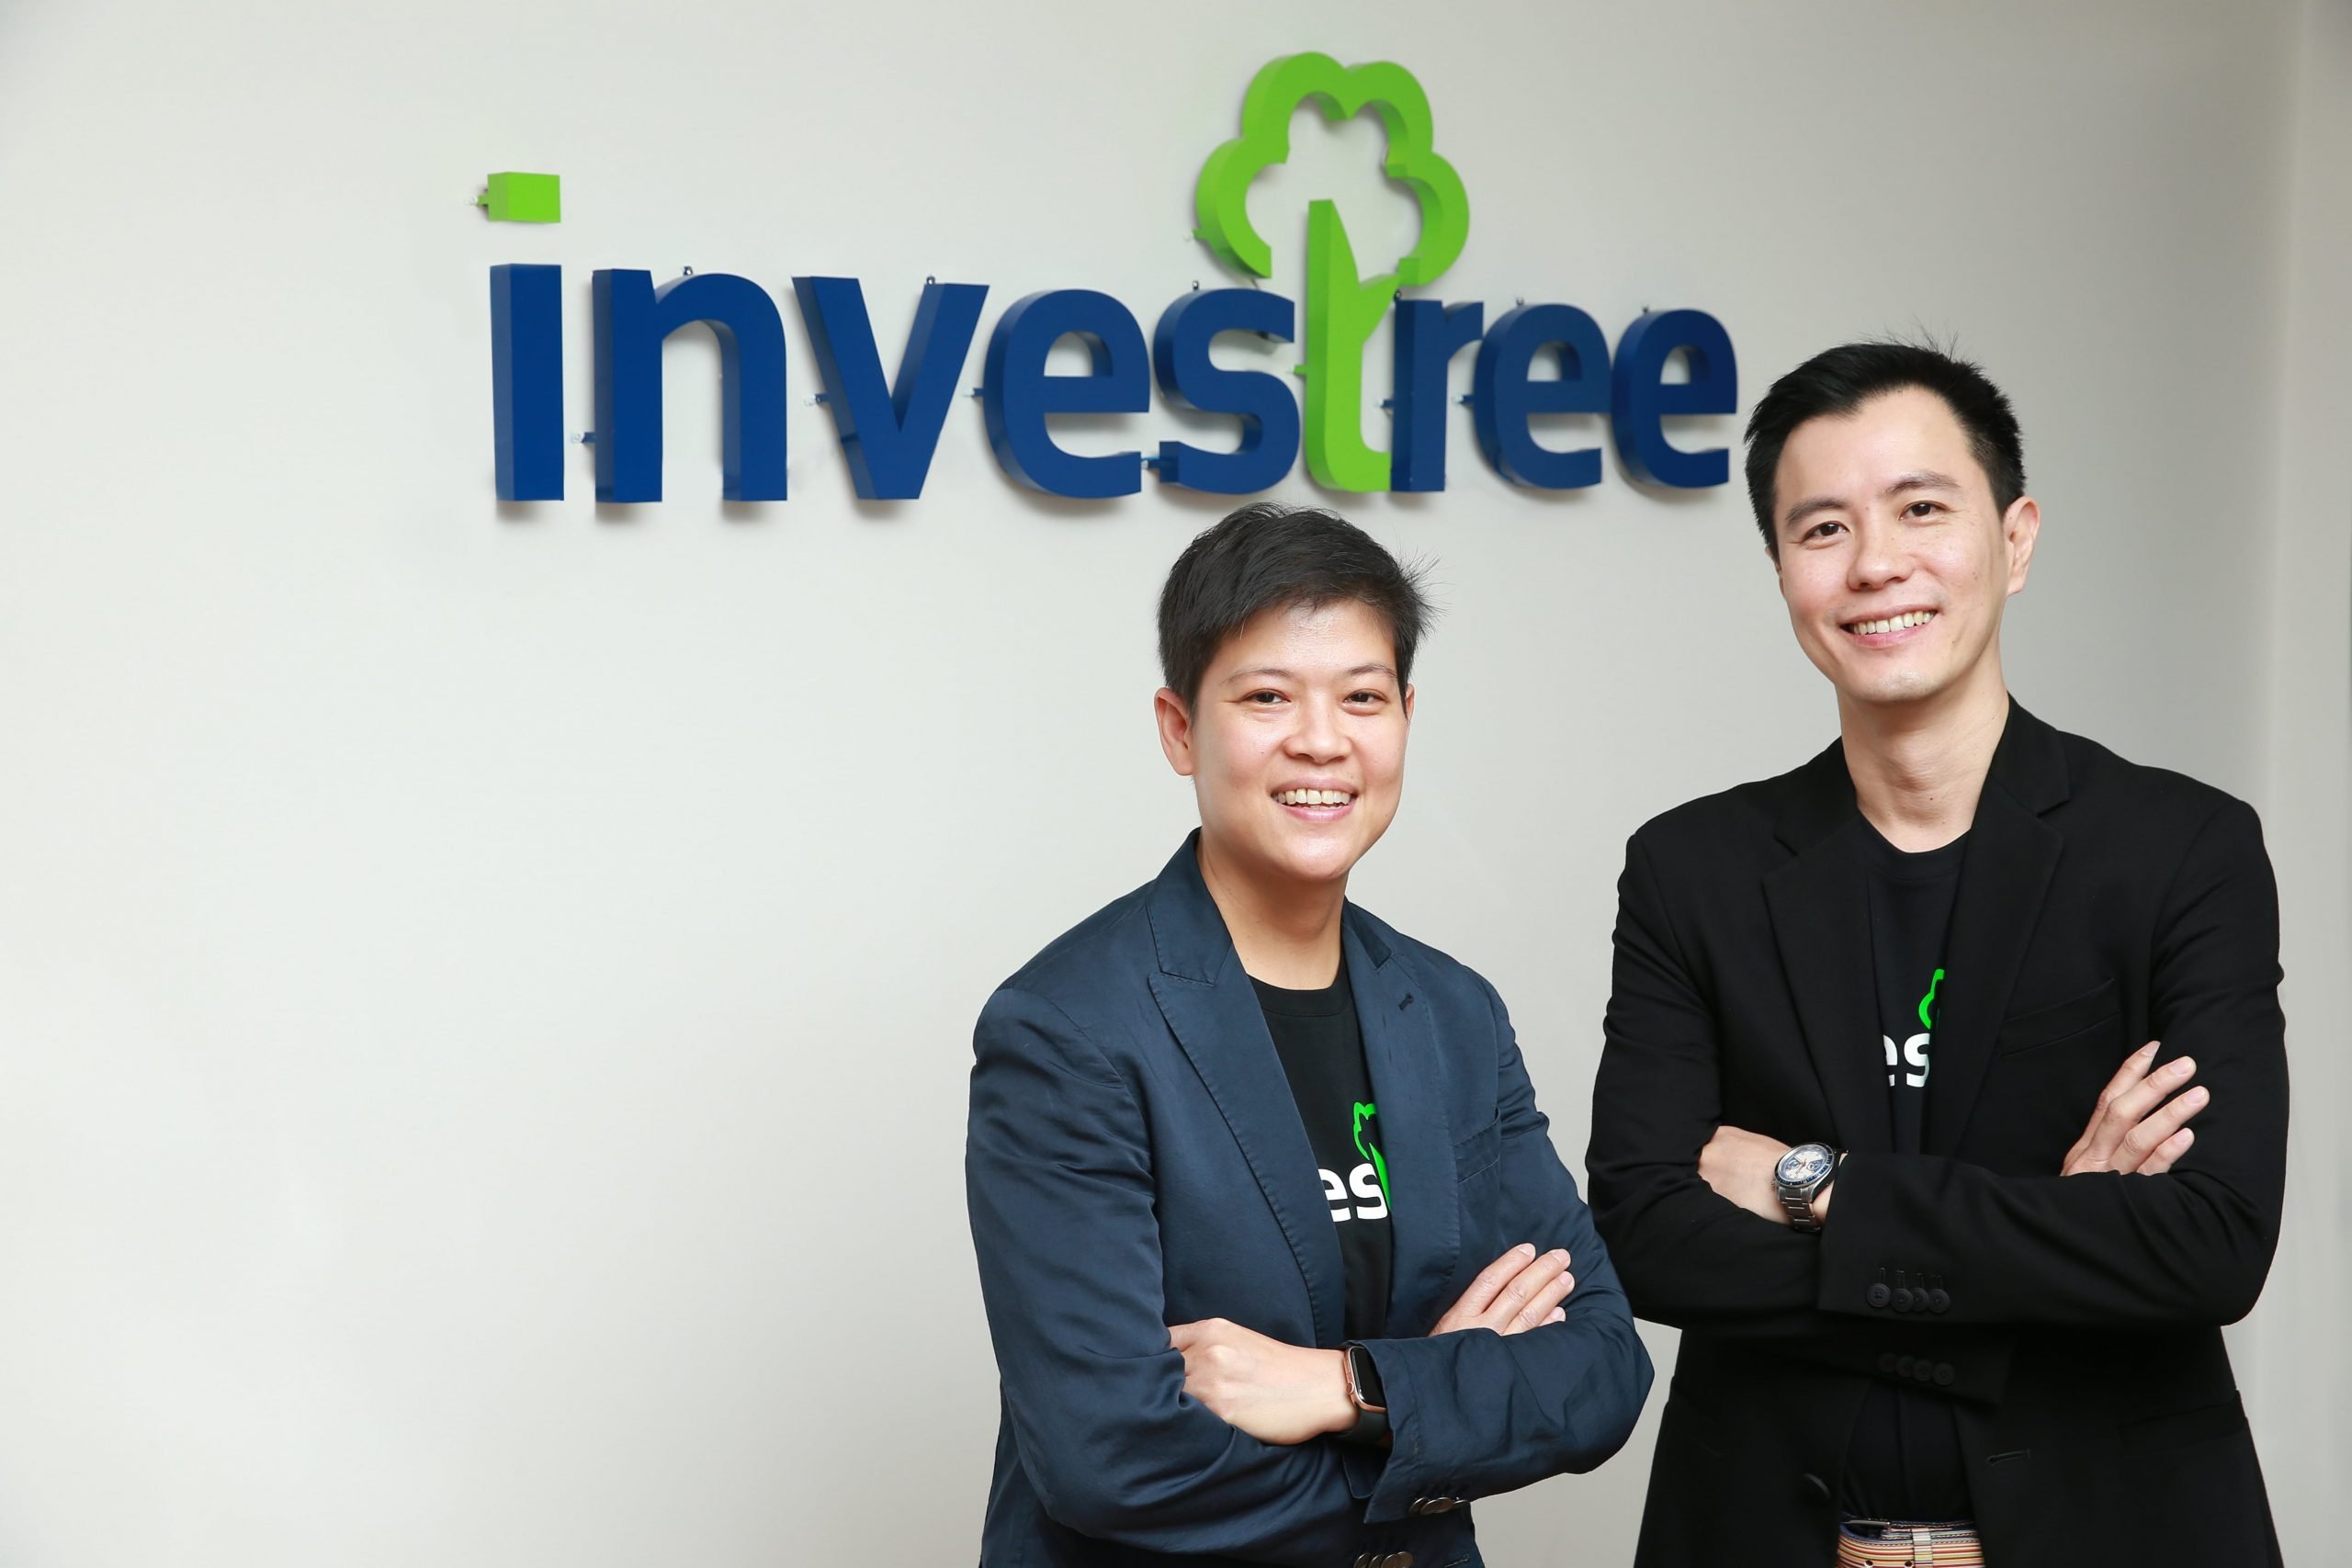 Investree Thailand is Gearing Up to Serve More SMEs in Thailand